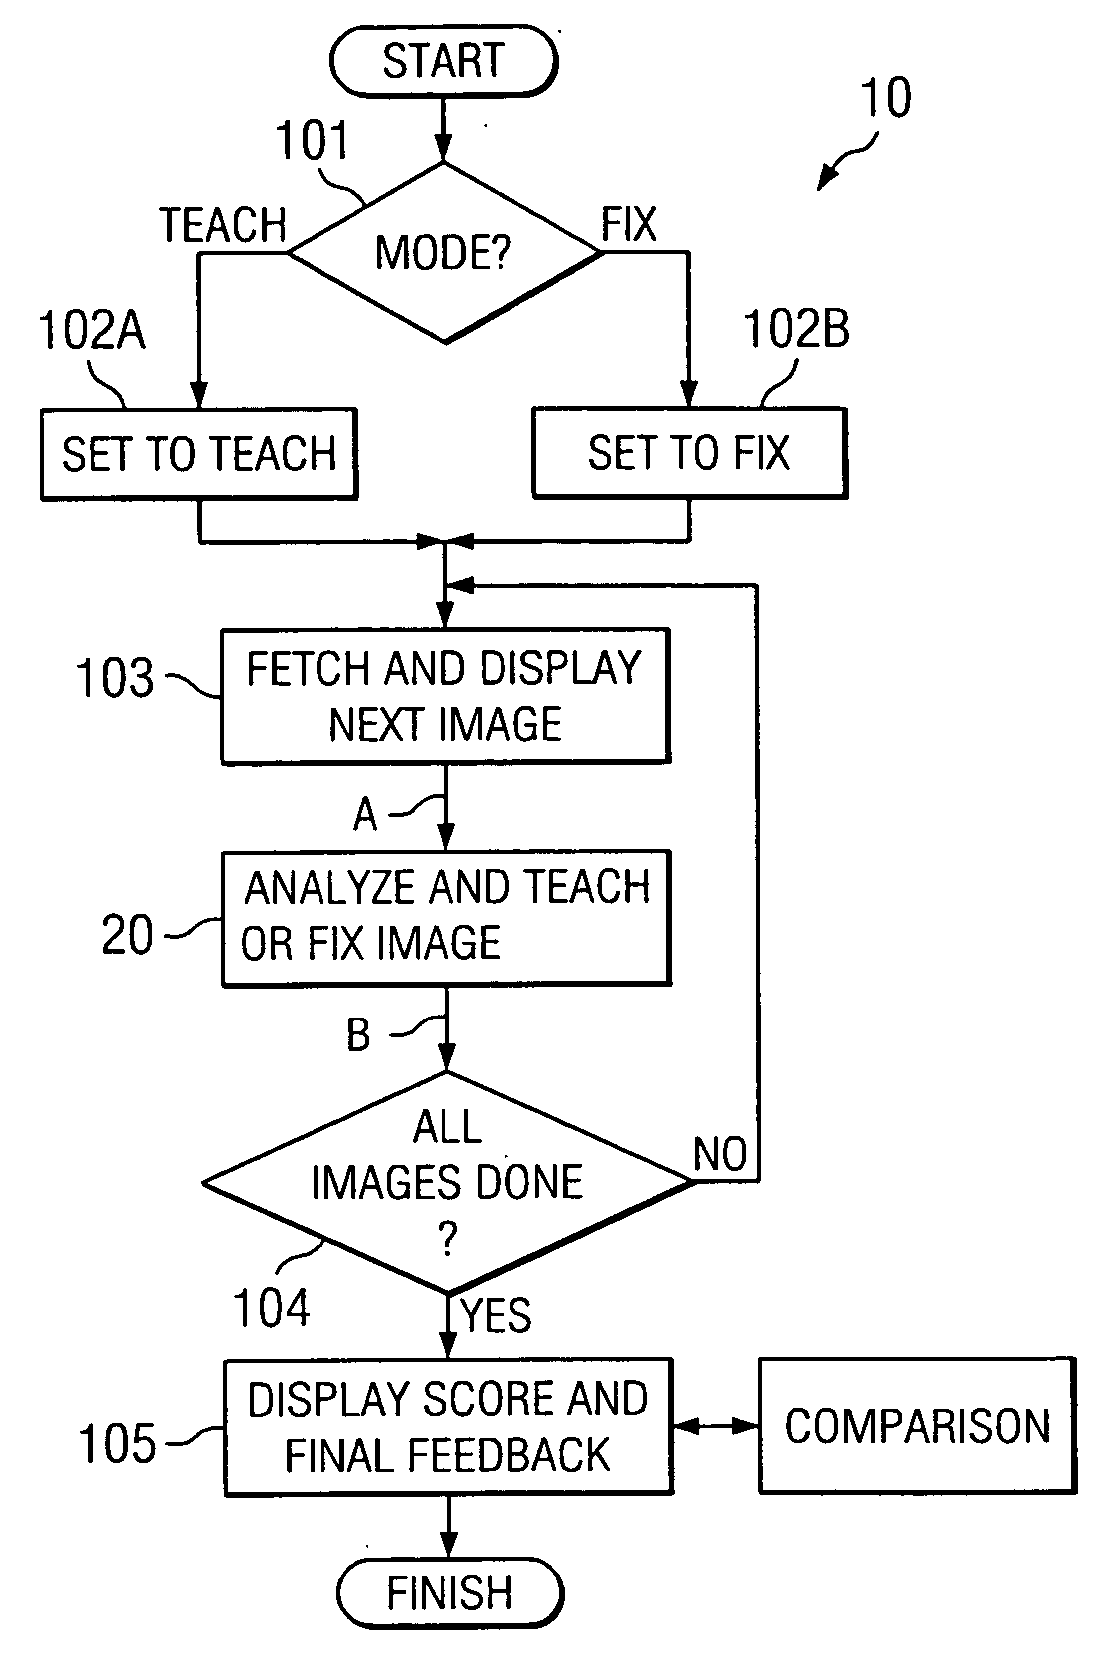 System and method for improving image capture ability